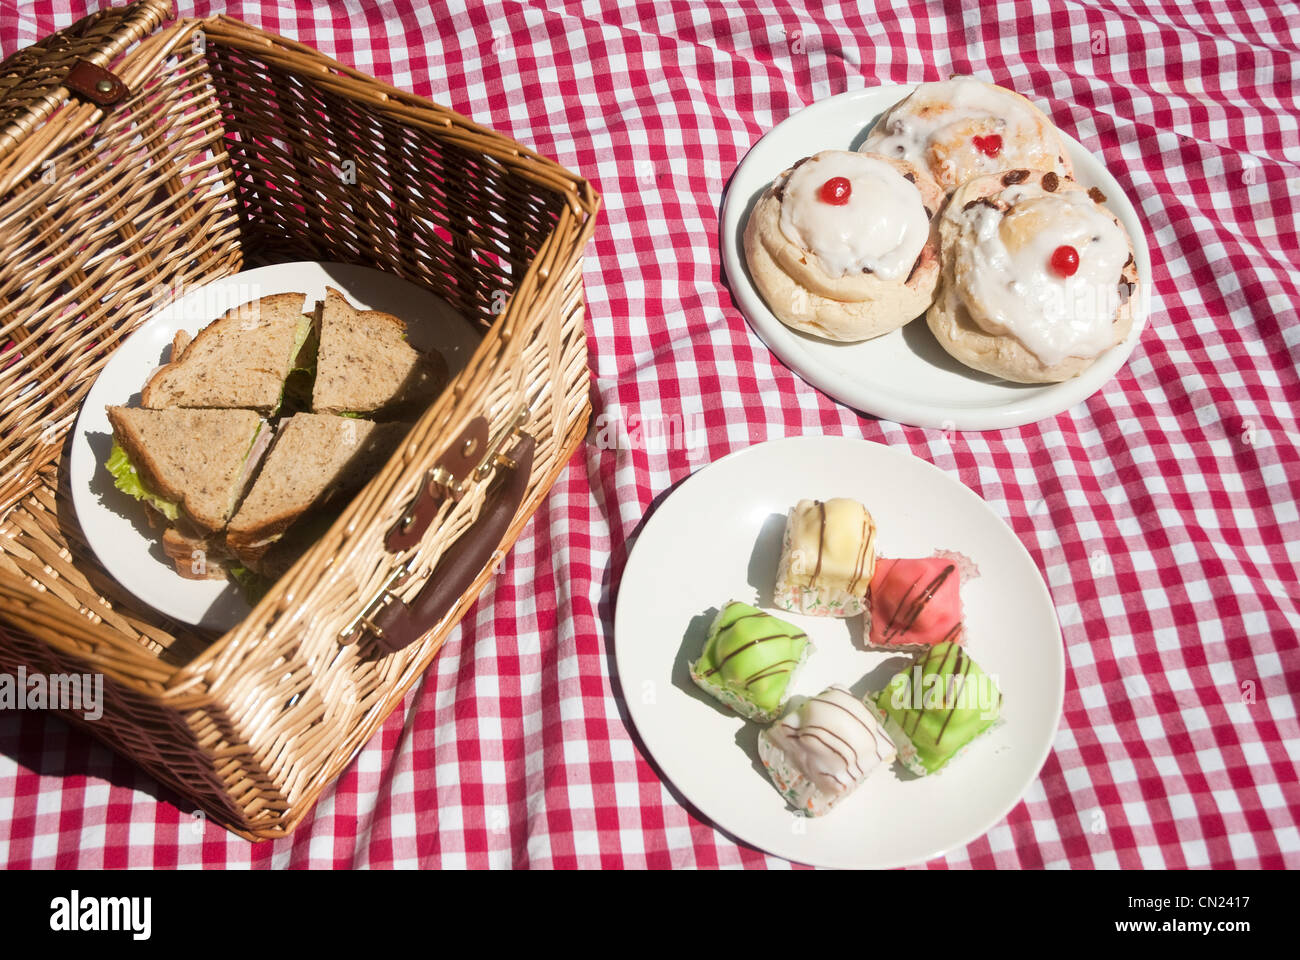 Picnic hamper with sandwiches and cakes Stock Photo